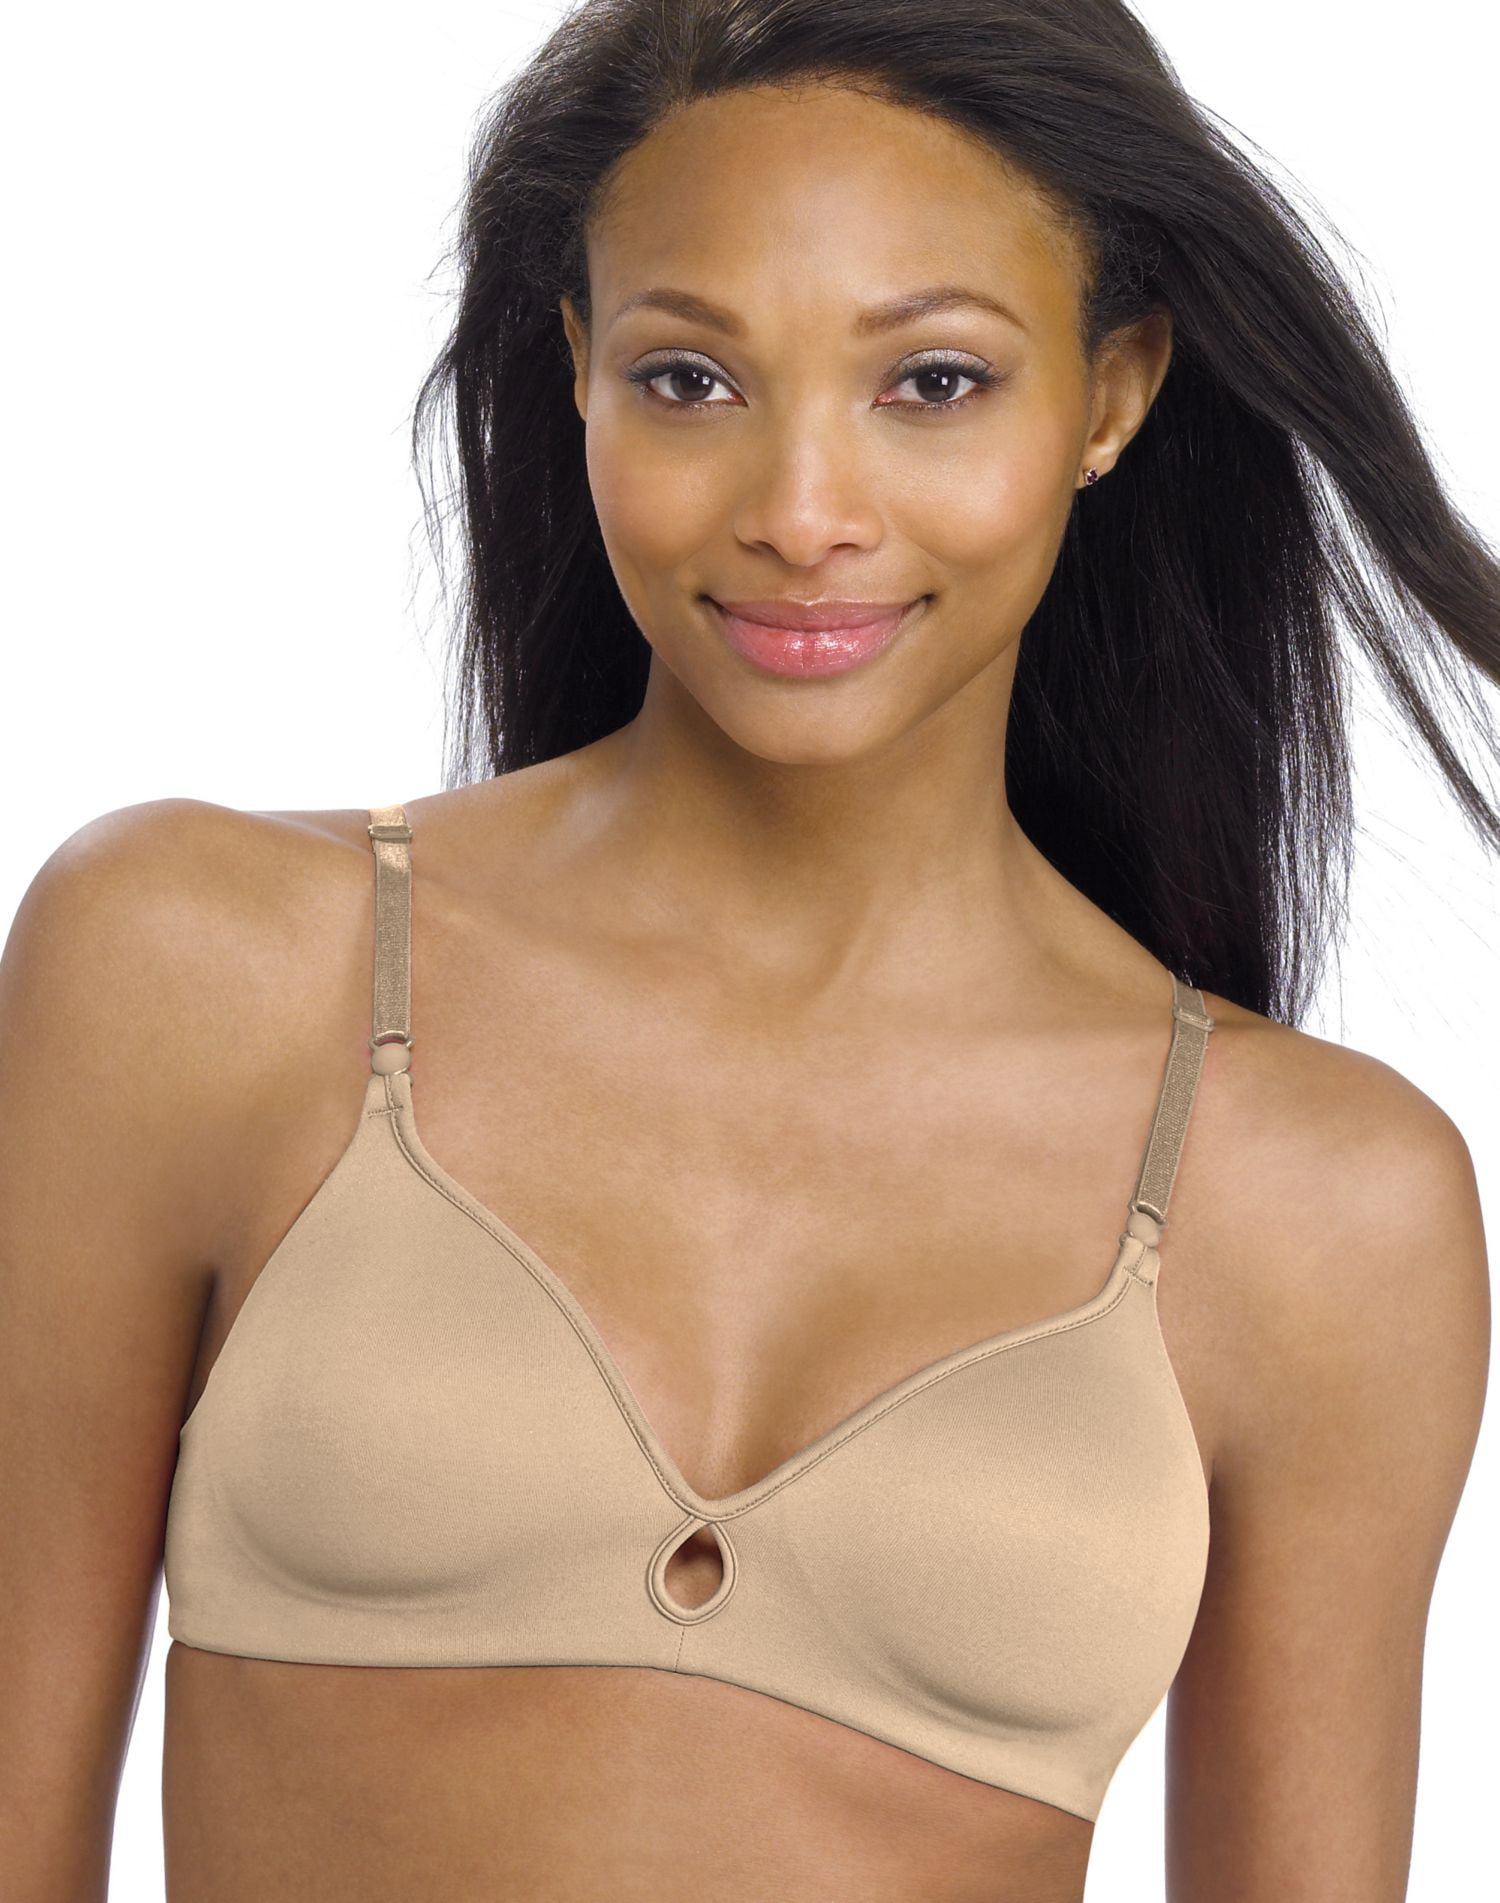 Barely There Invisible Look Women`s Wirefree Bra - Best-Seller, 34B 